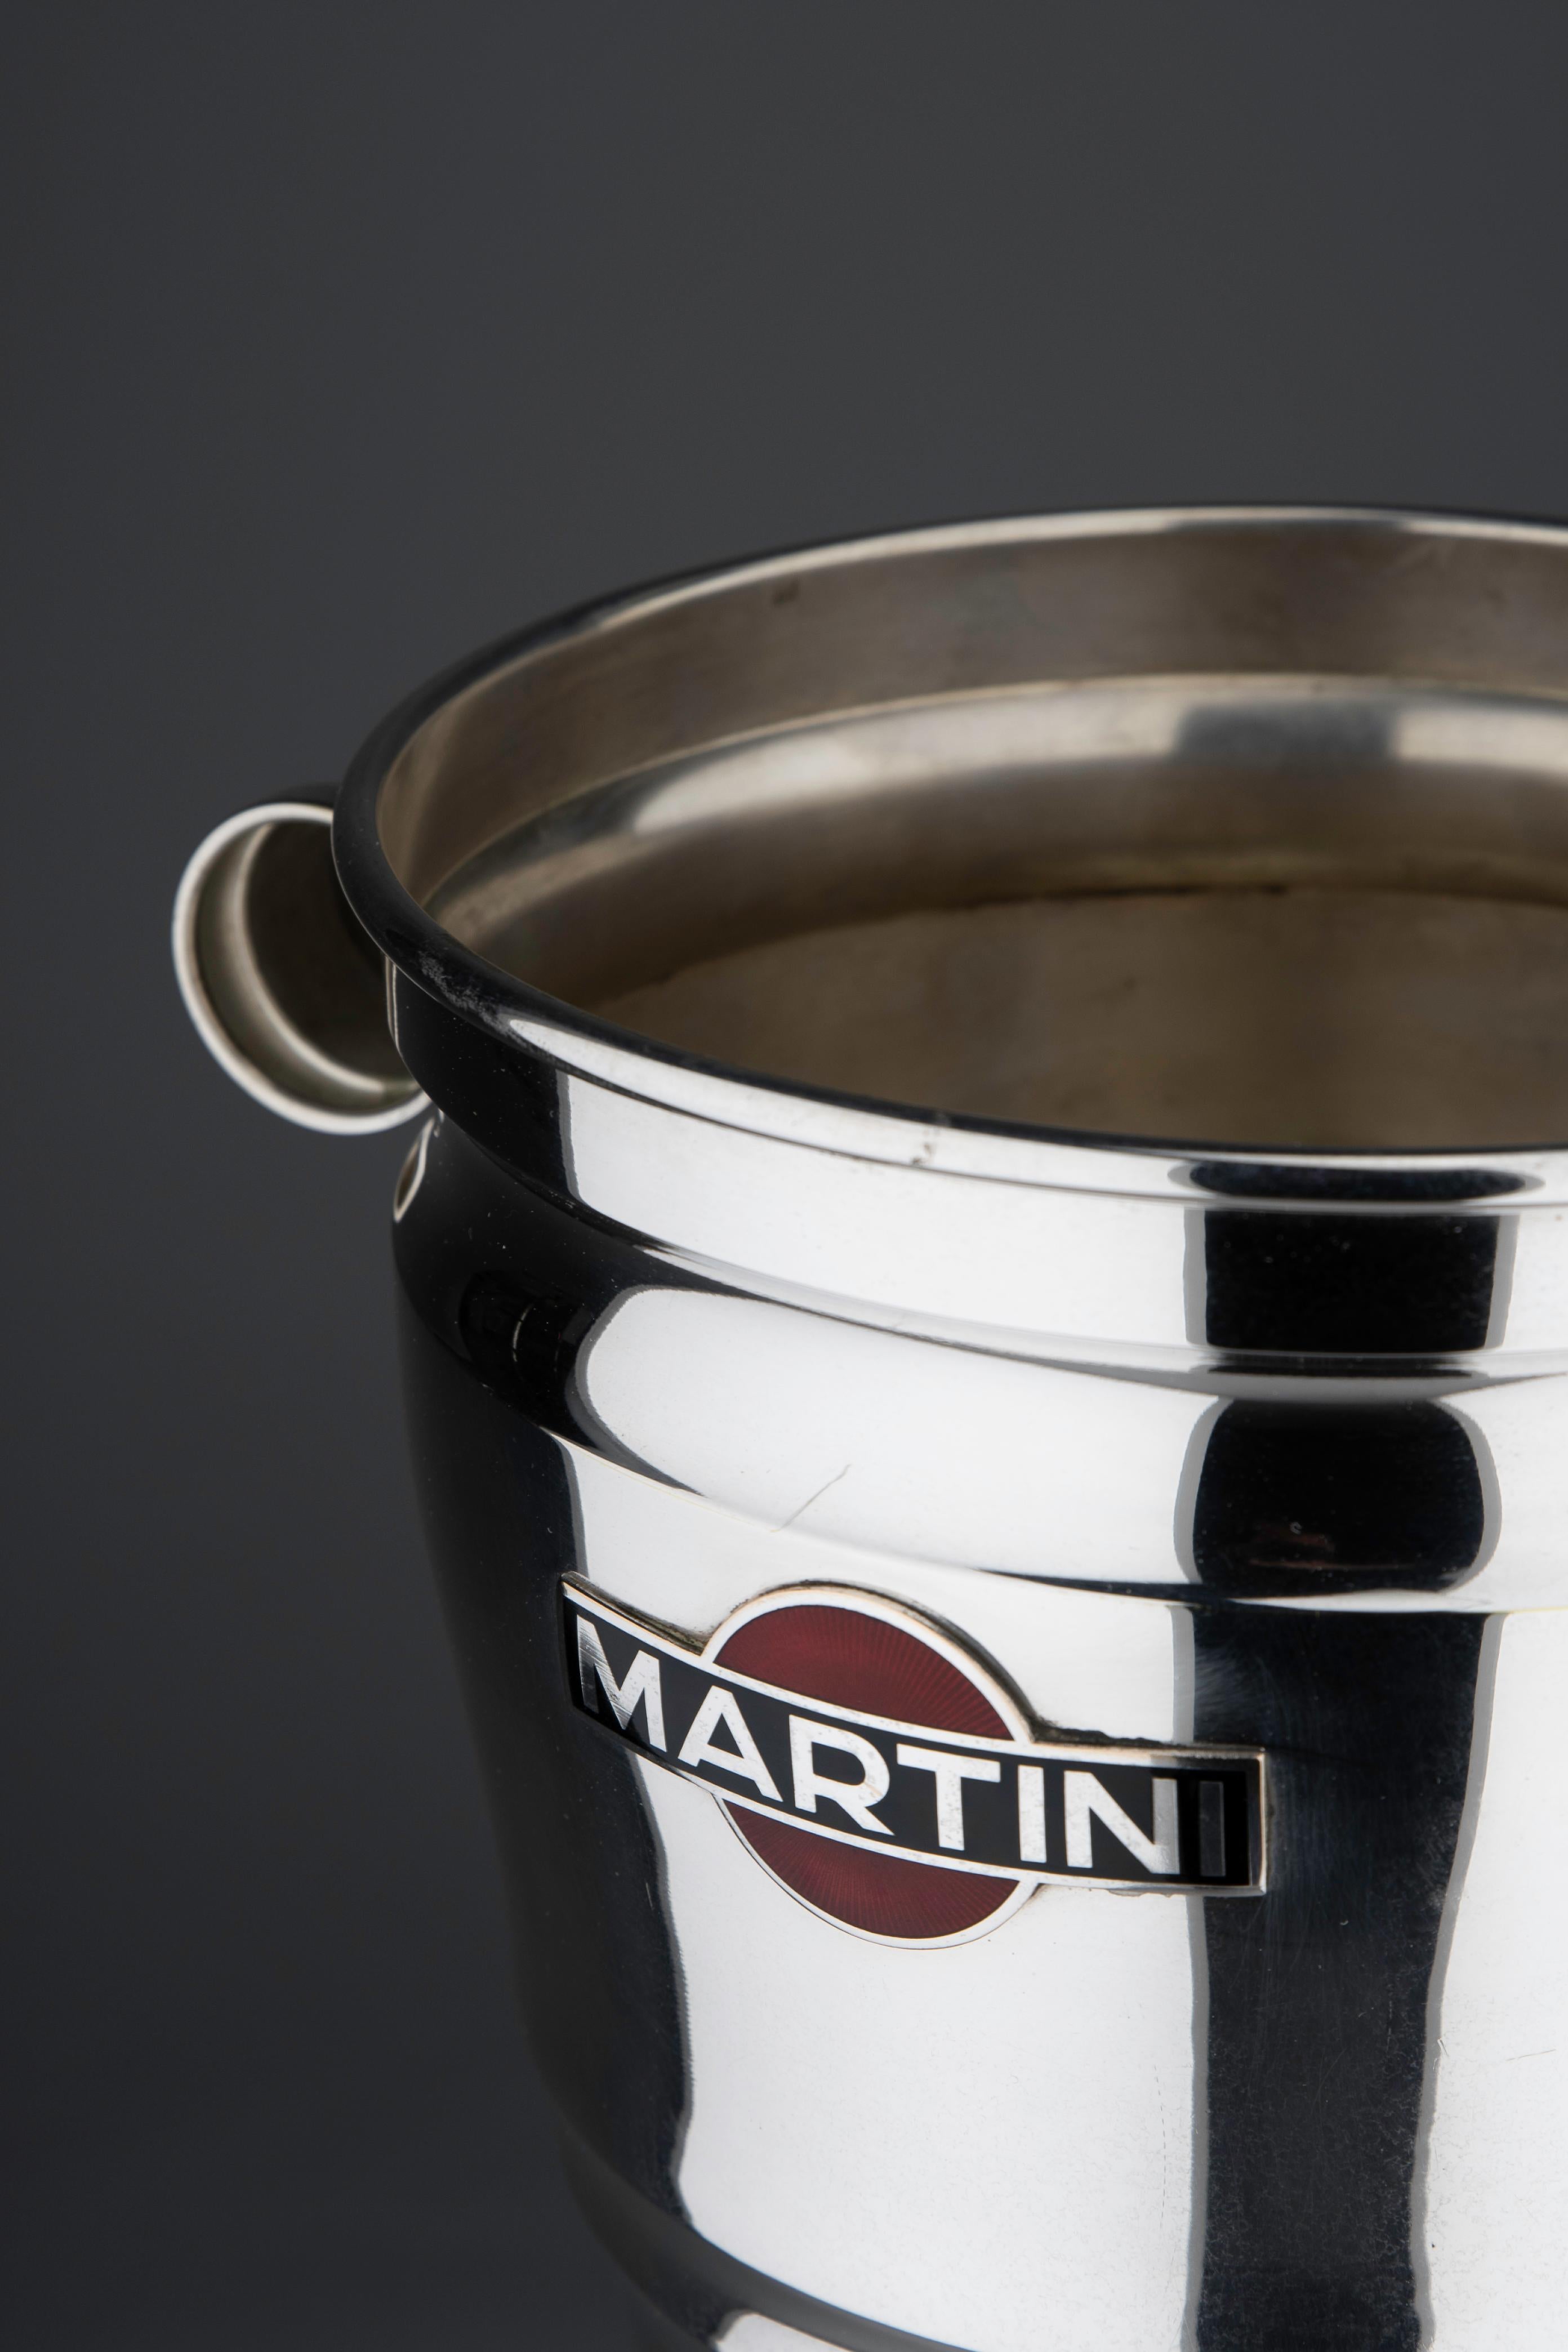 Martini Silver Plated and Enamel Champagne Cooler 19609 For Sale 1